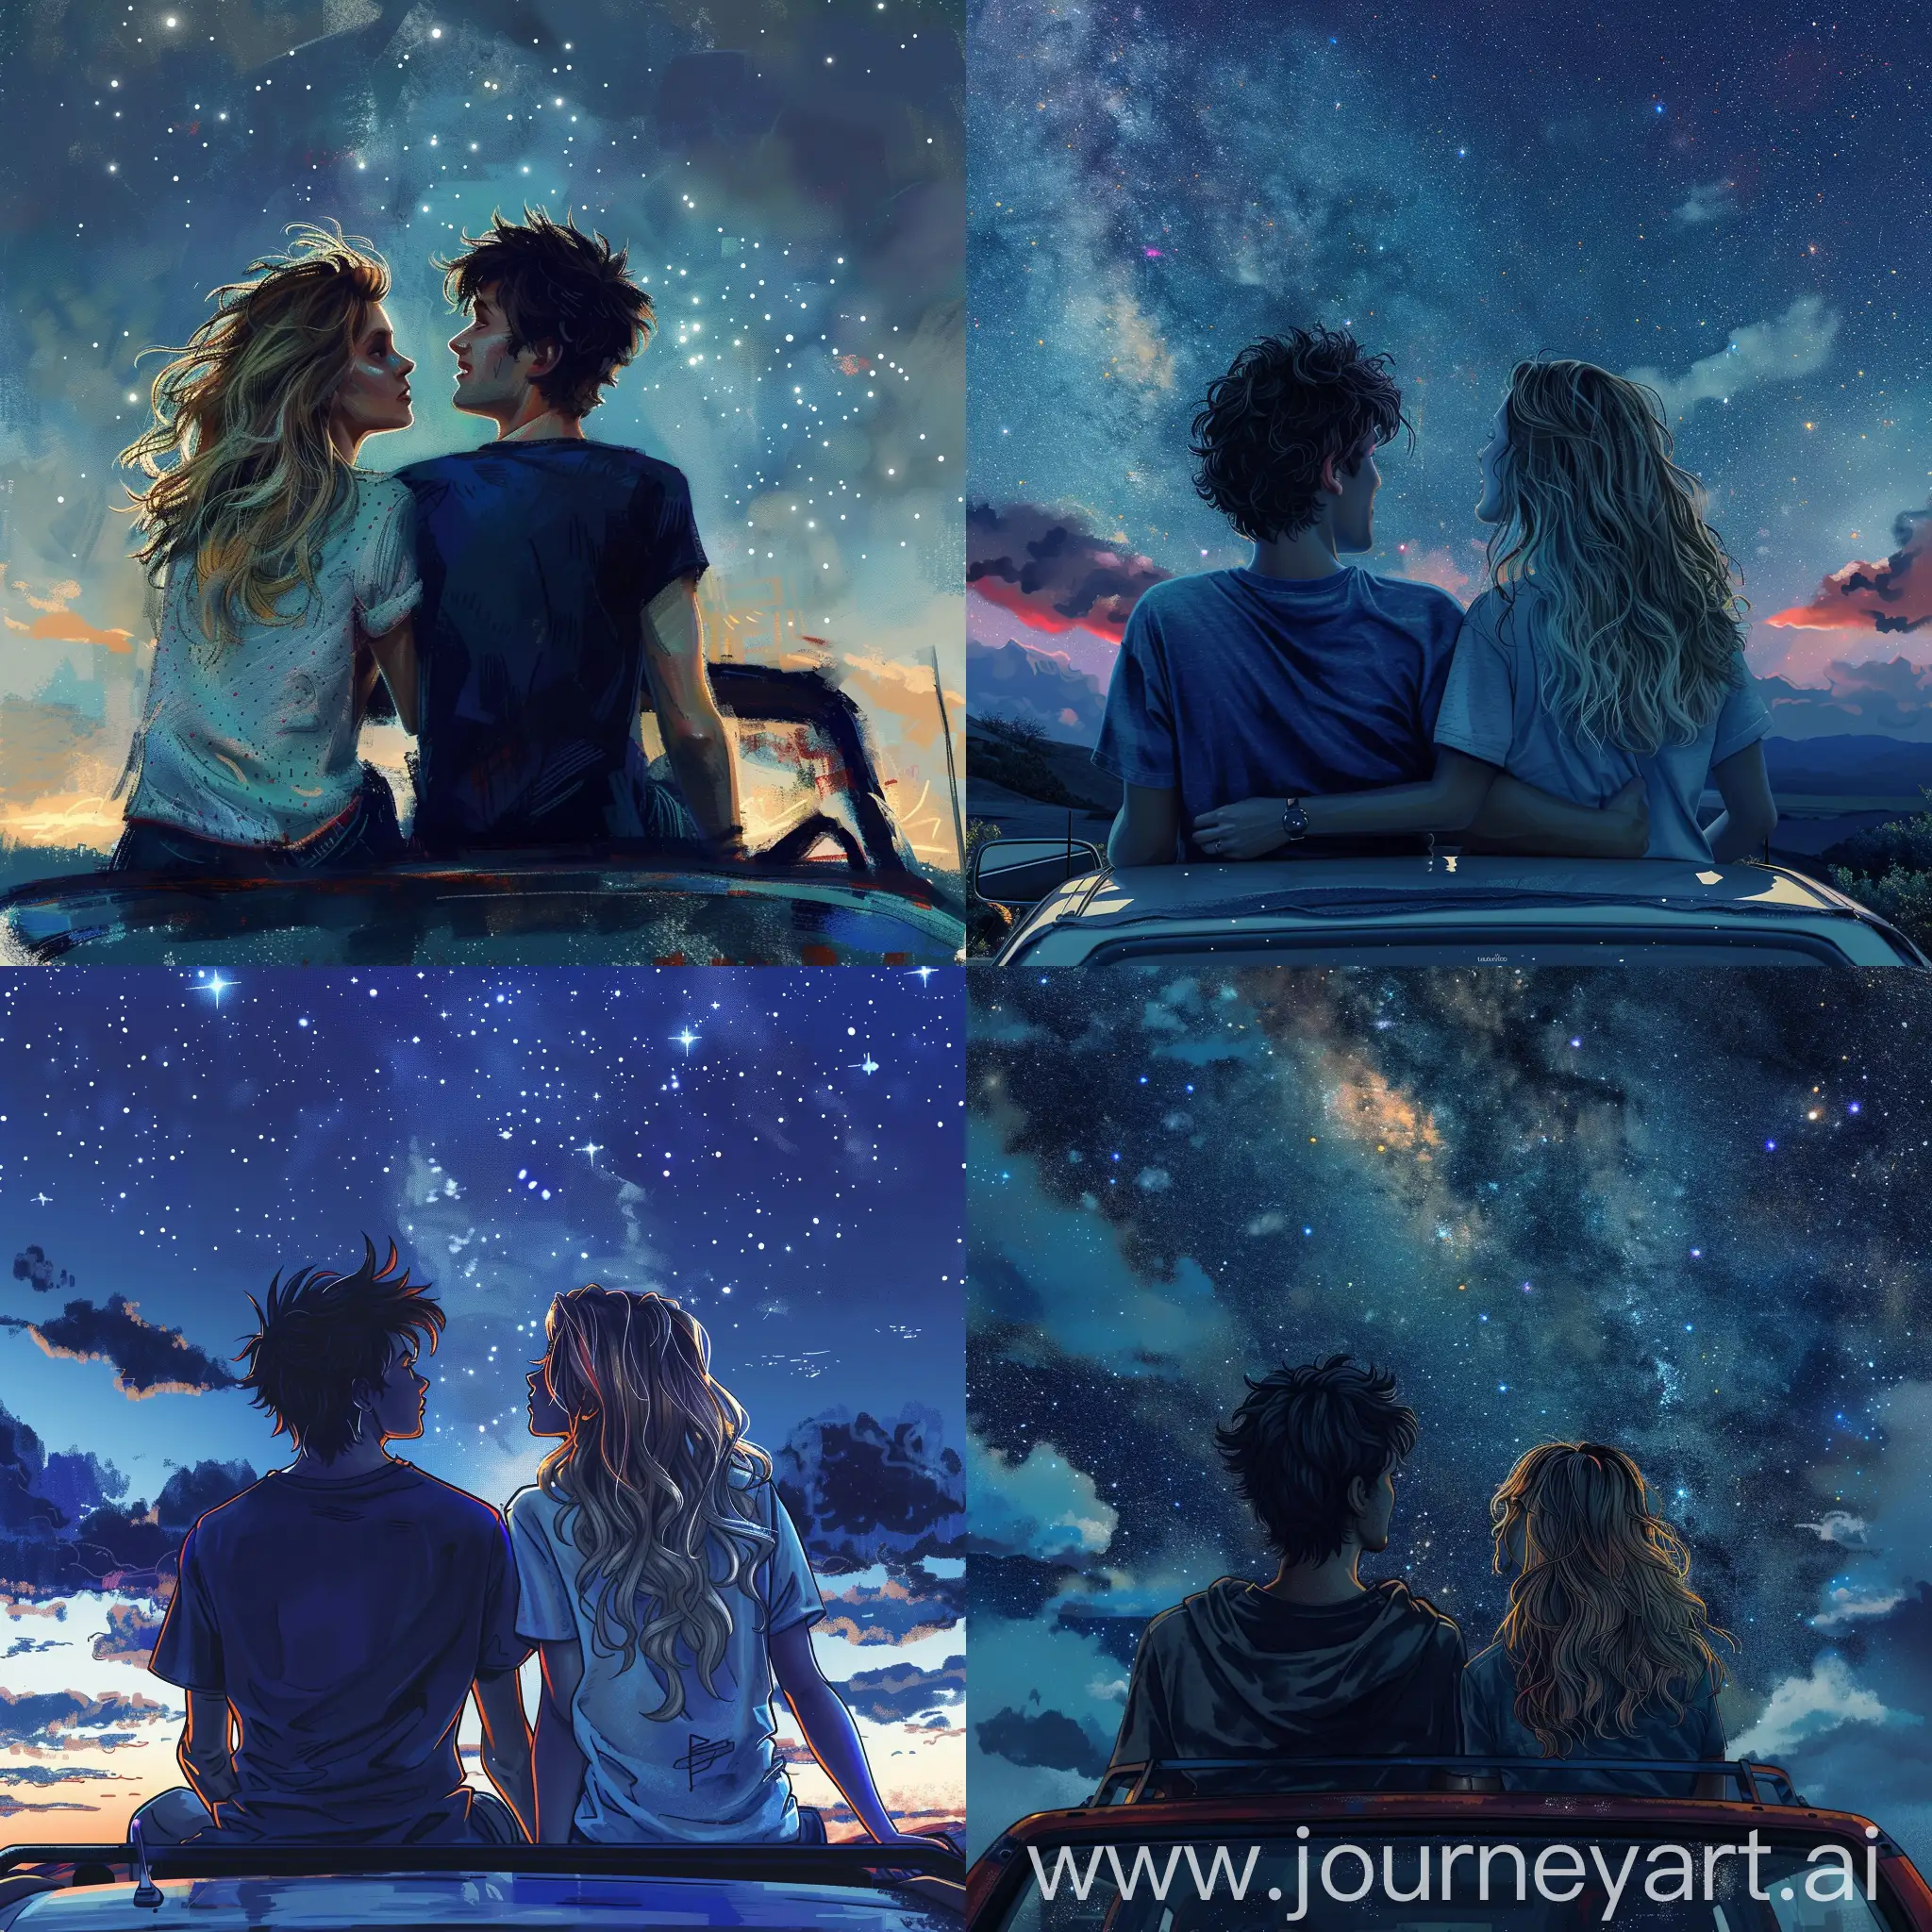 Couple-Contemplating-Future-Under-Starlit-Sky-While-Seated-on-Car